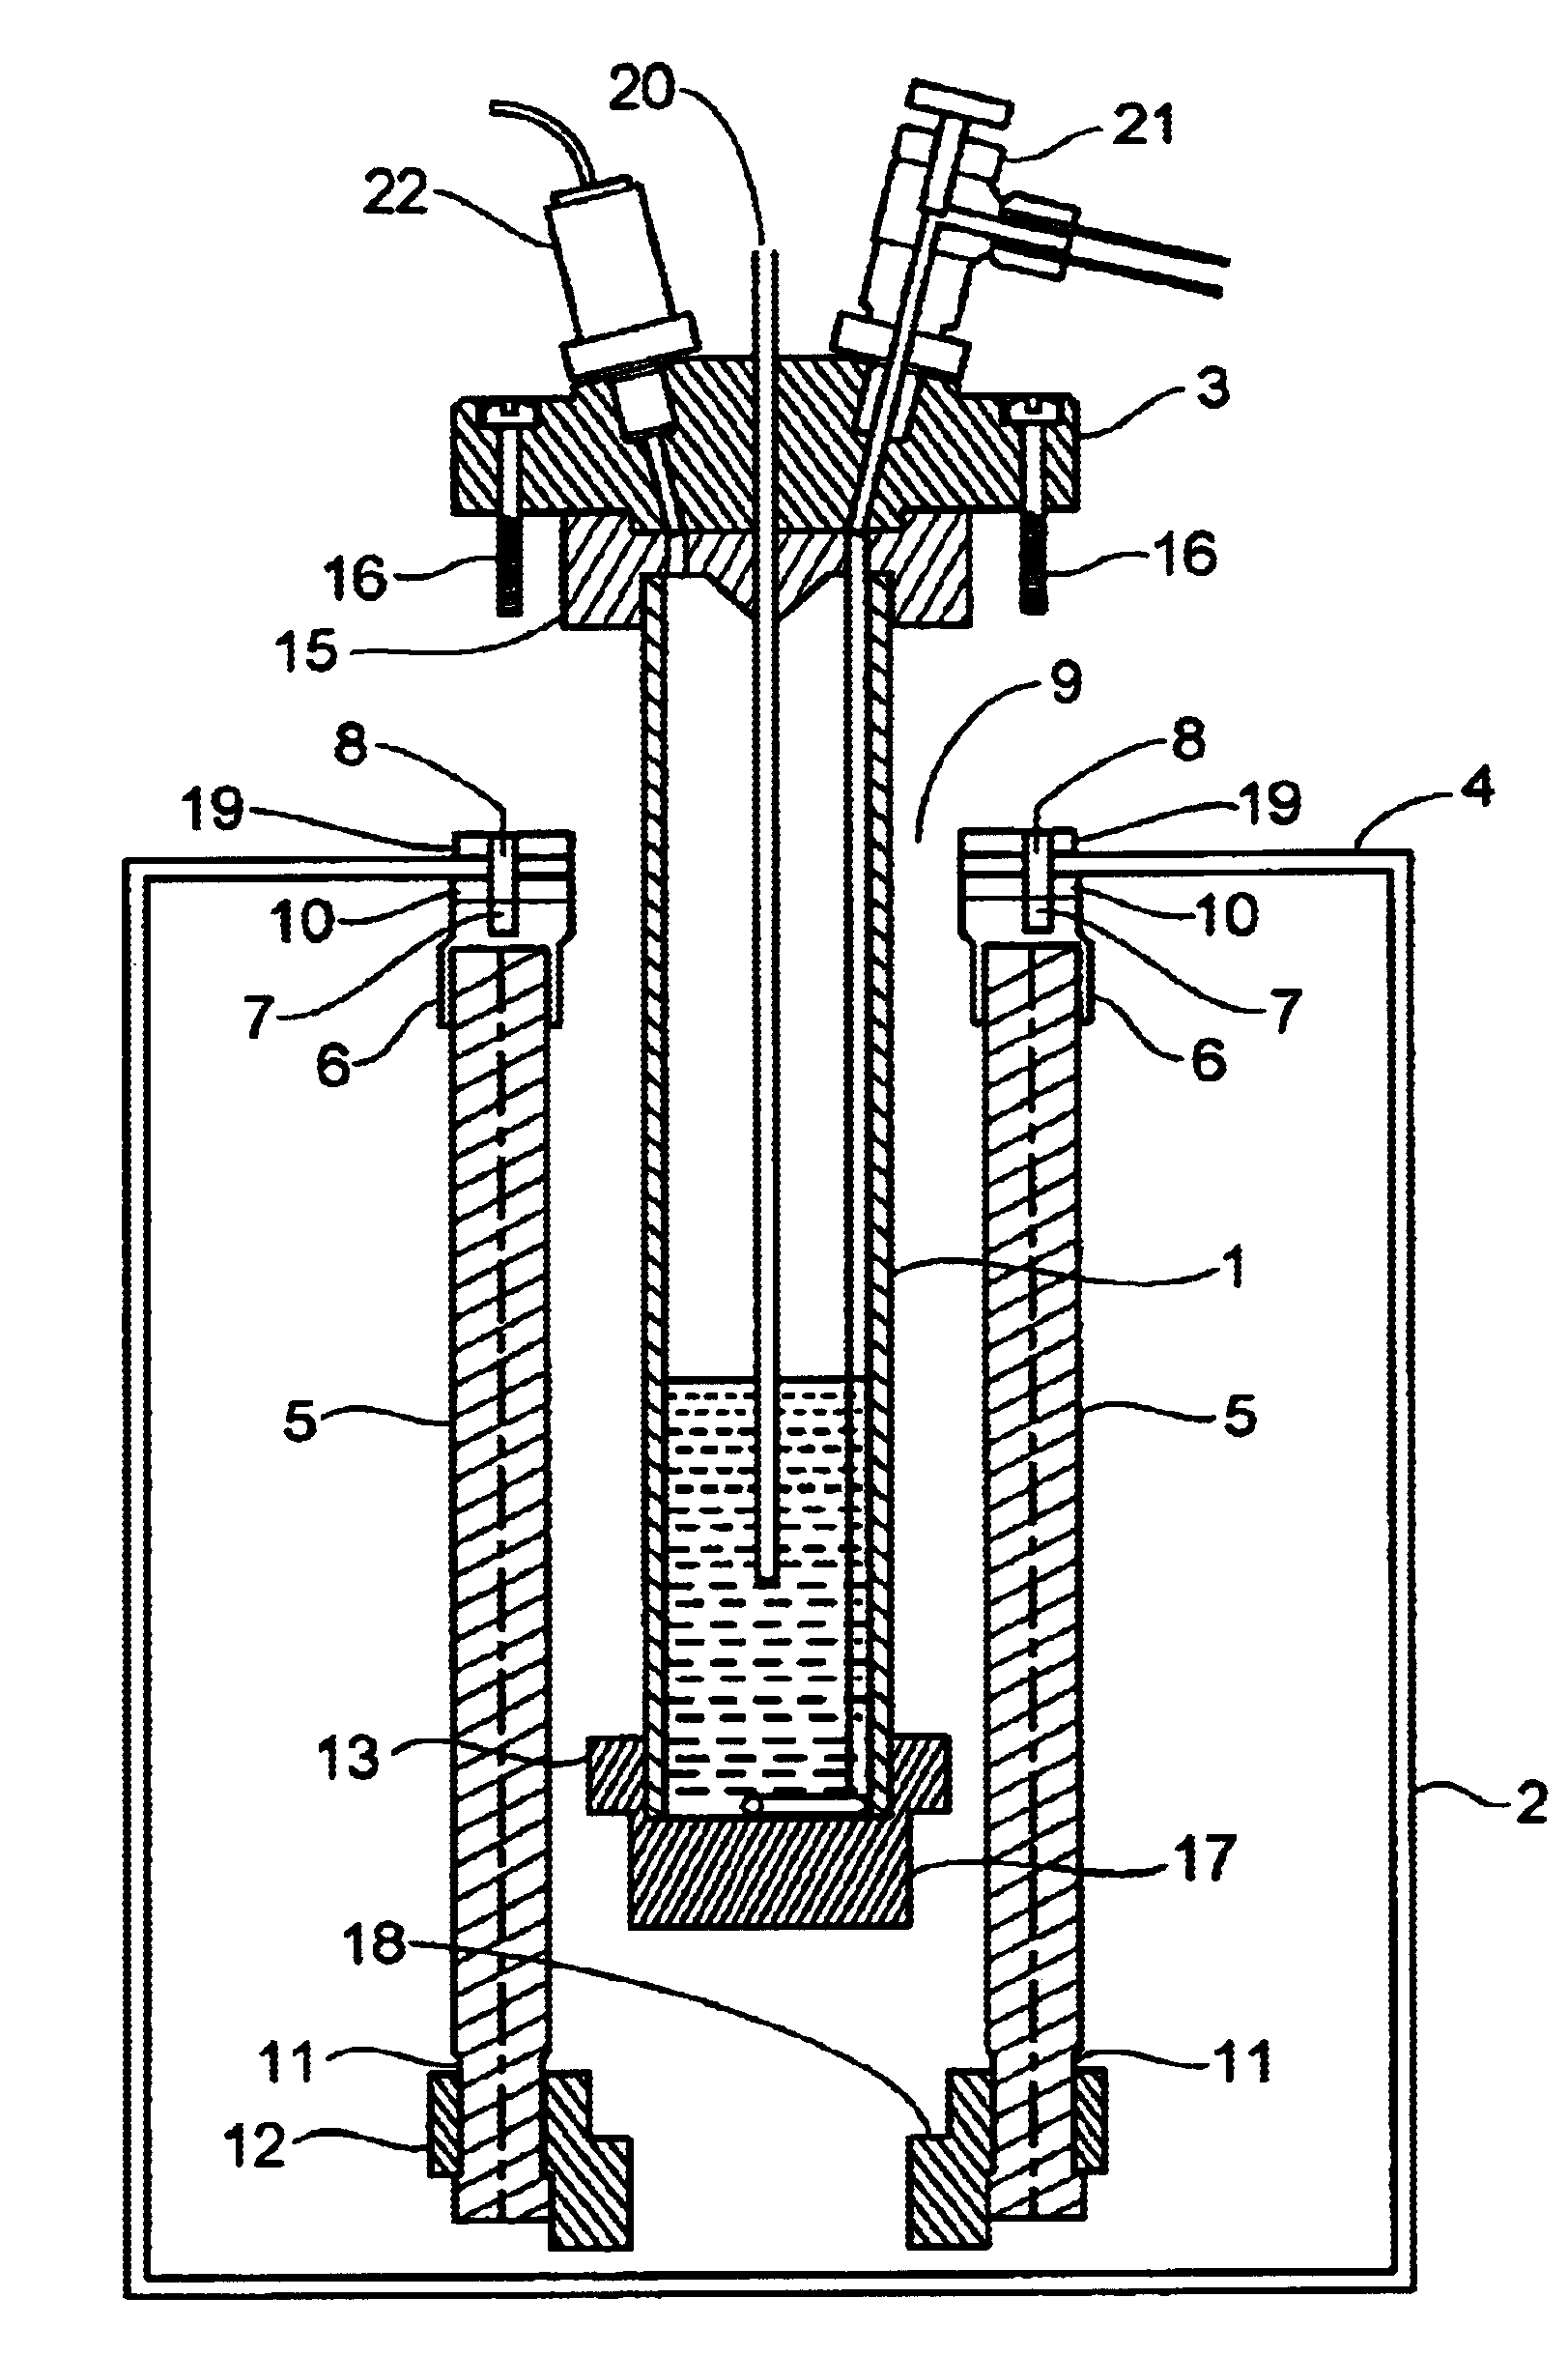 Device for implementing chemical reactions and processes in high frequency fields